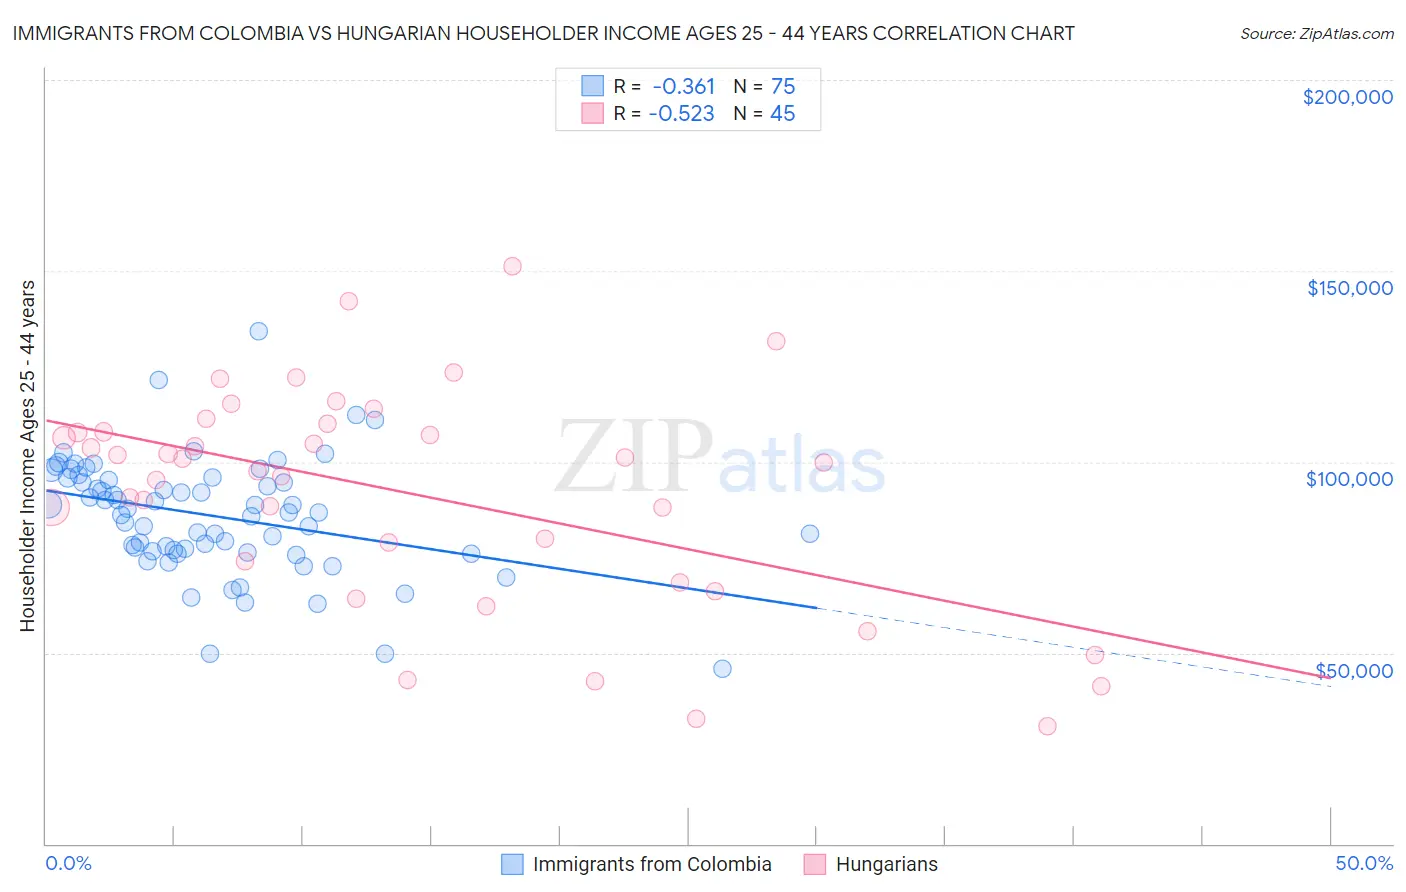 Immigrants from Colombia vs Hungarian Householder Income Ages 25 - 44 years